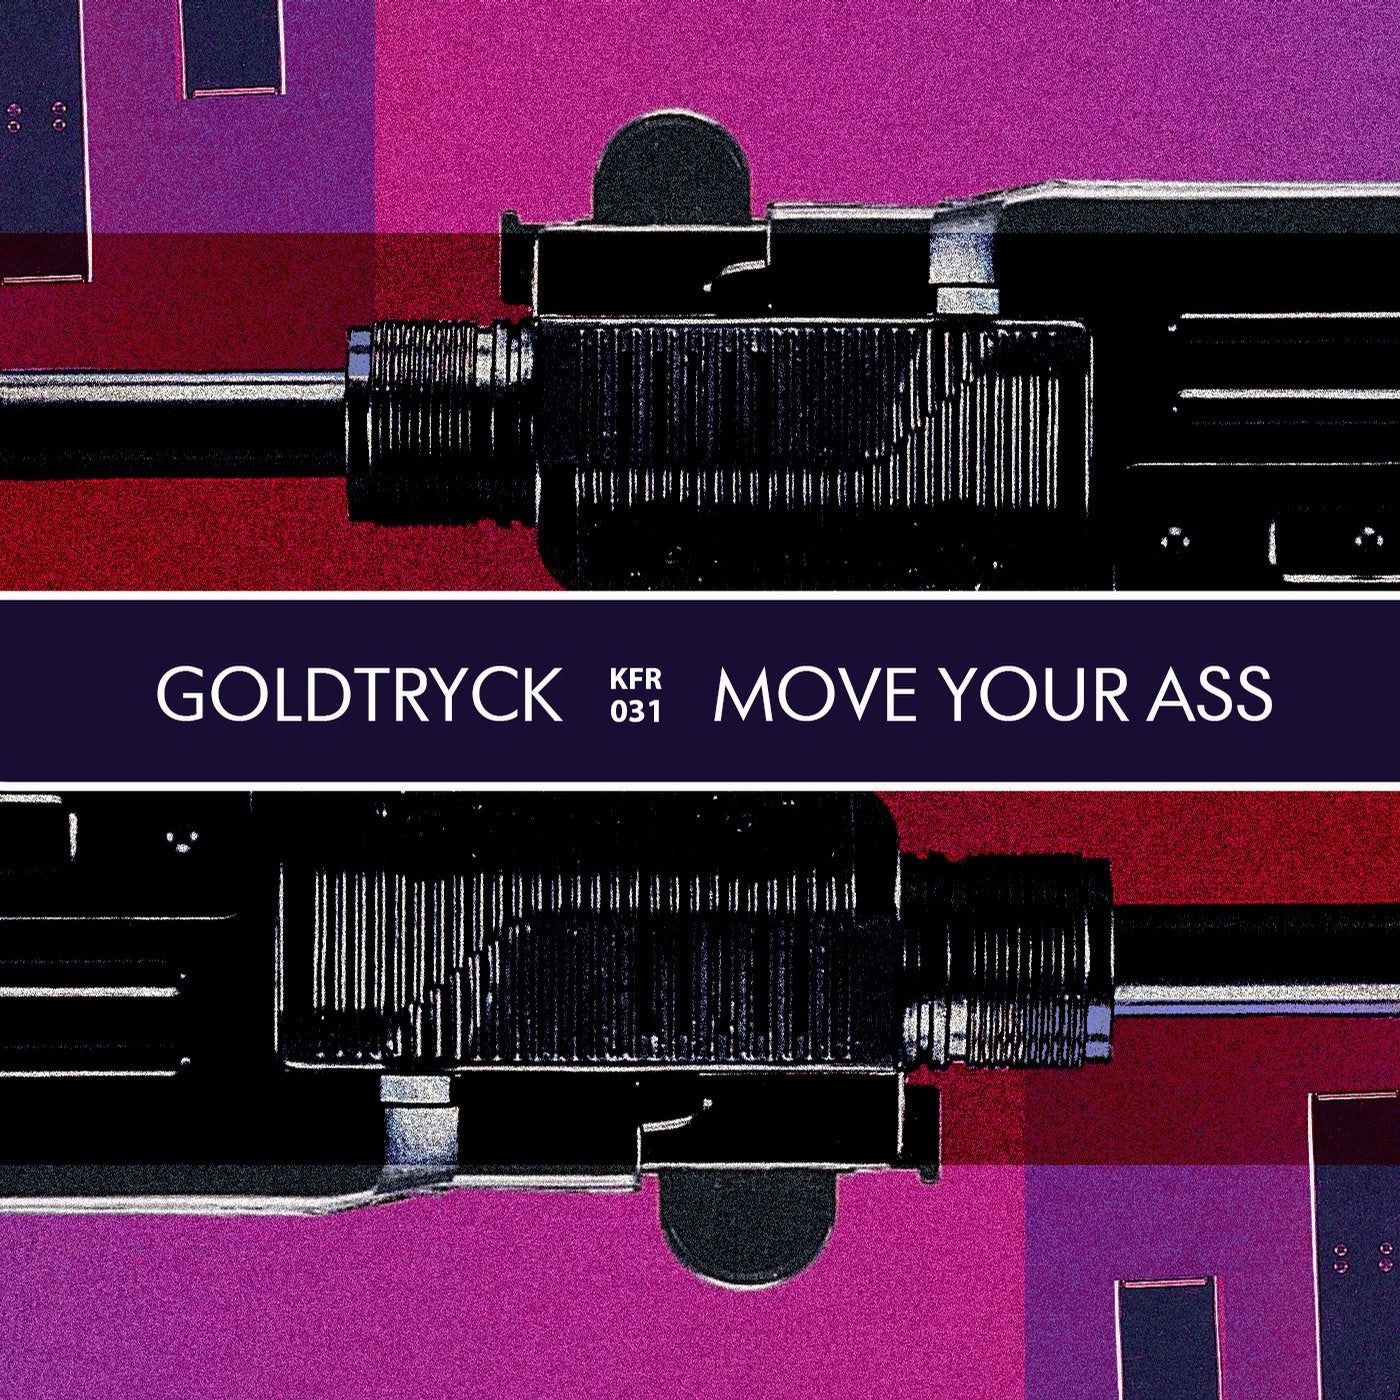 Move Your Ass